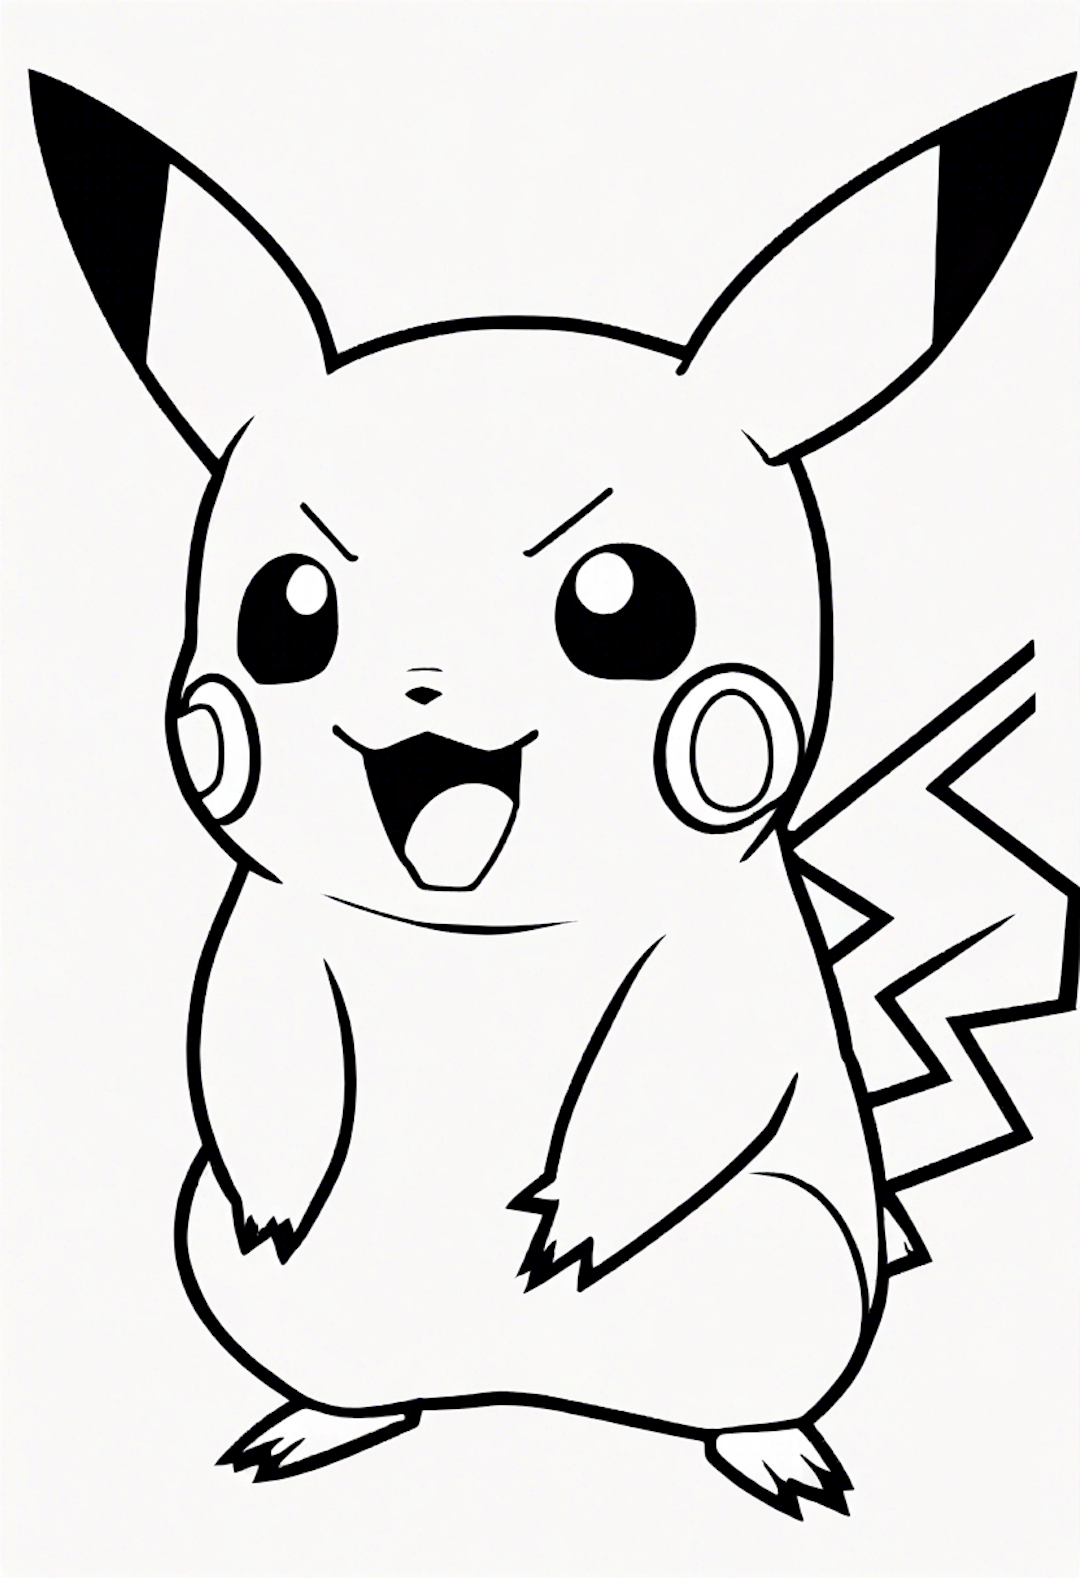 Frustrated Pikachu